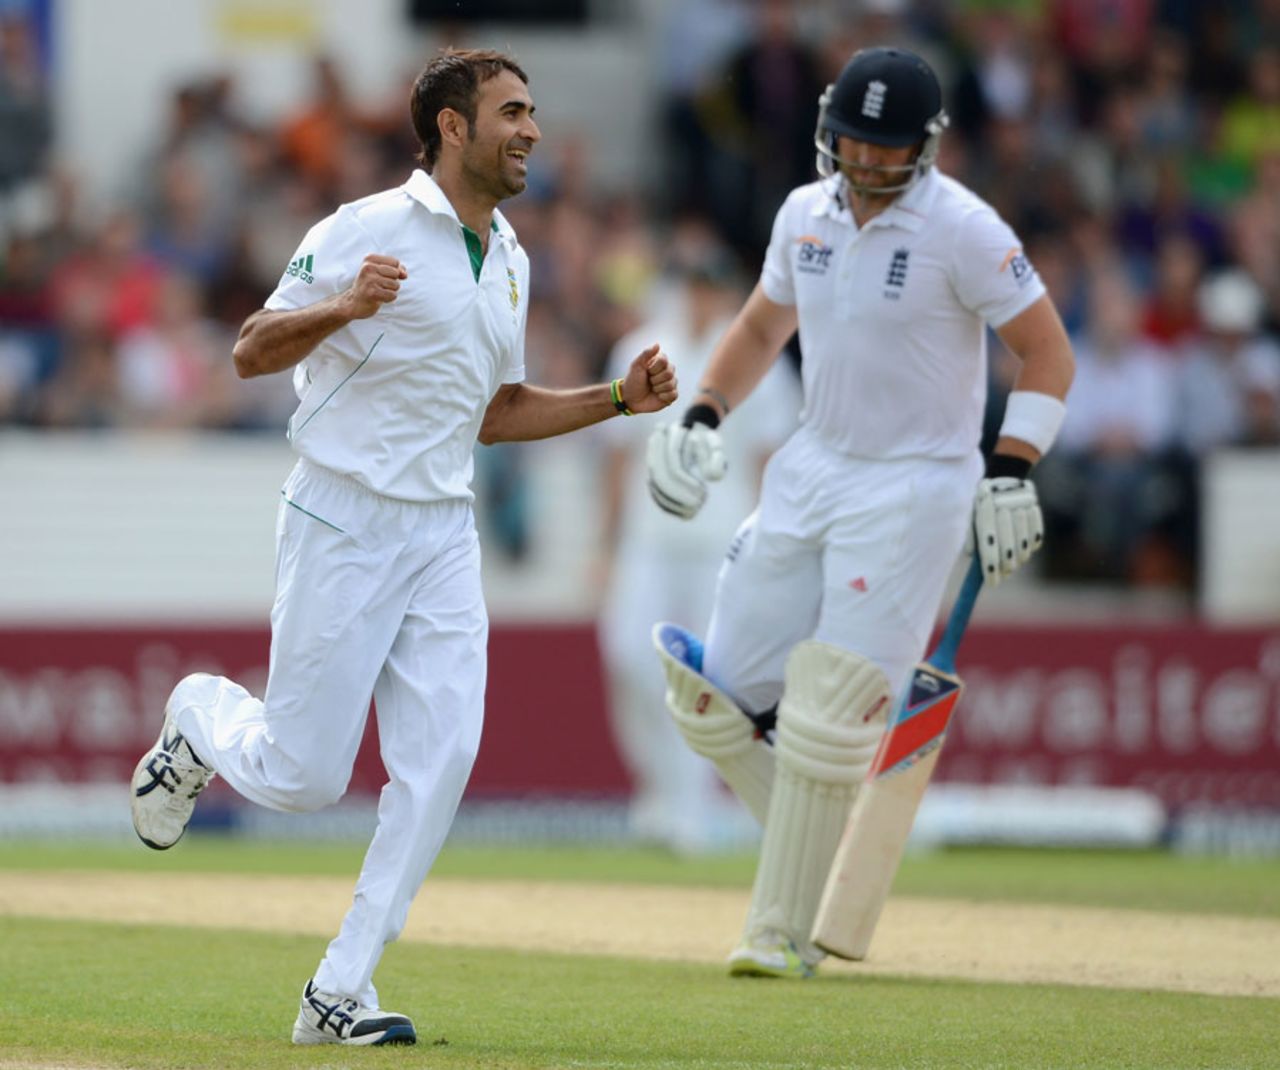 Imran Tahir wrapped up England's lower order with three wickets, England v South Africa, 2nd Investec Test, Headingley, 4th day, August 5, 2012